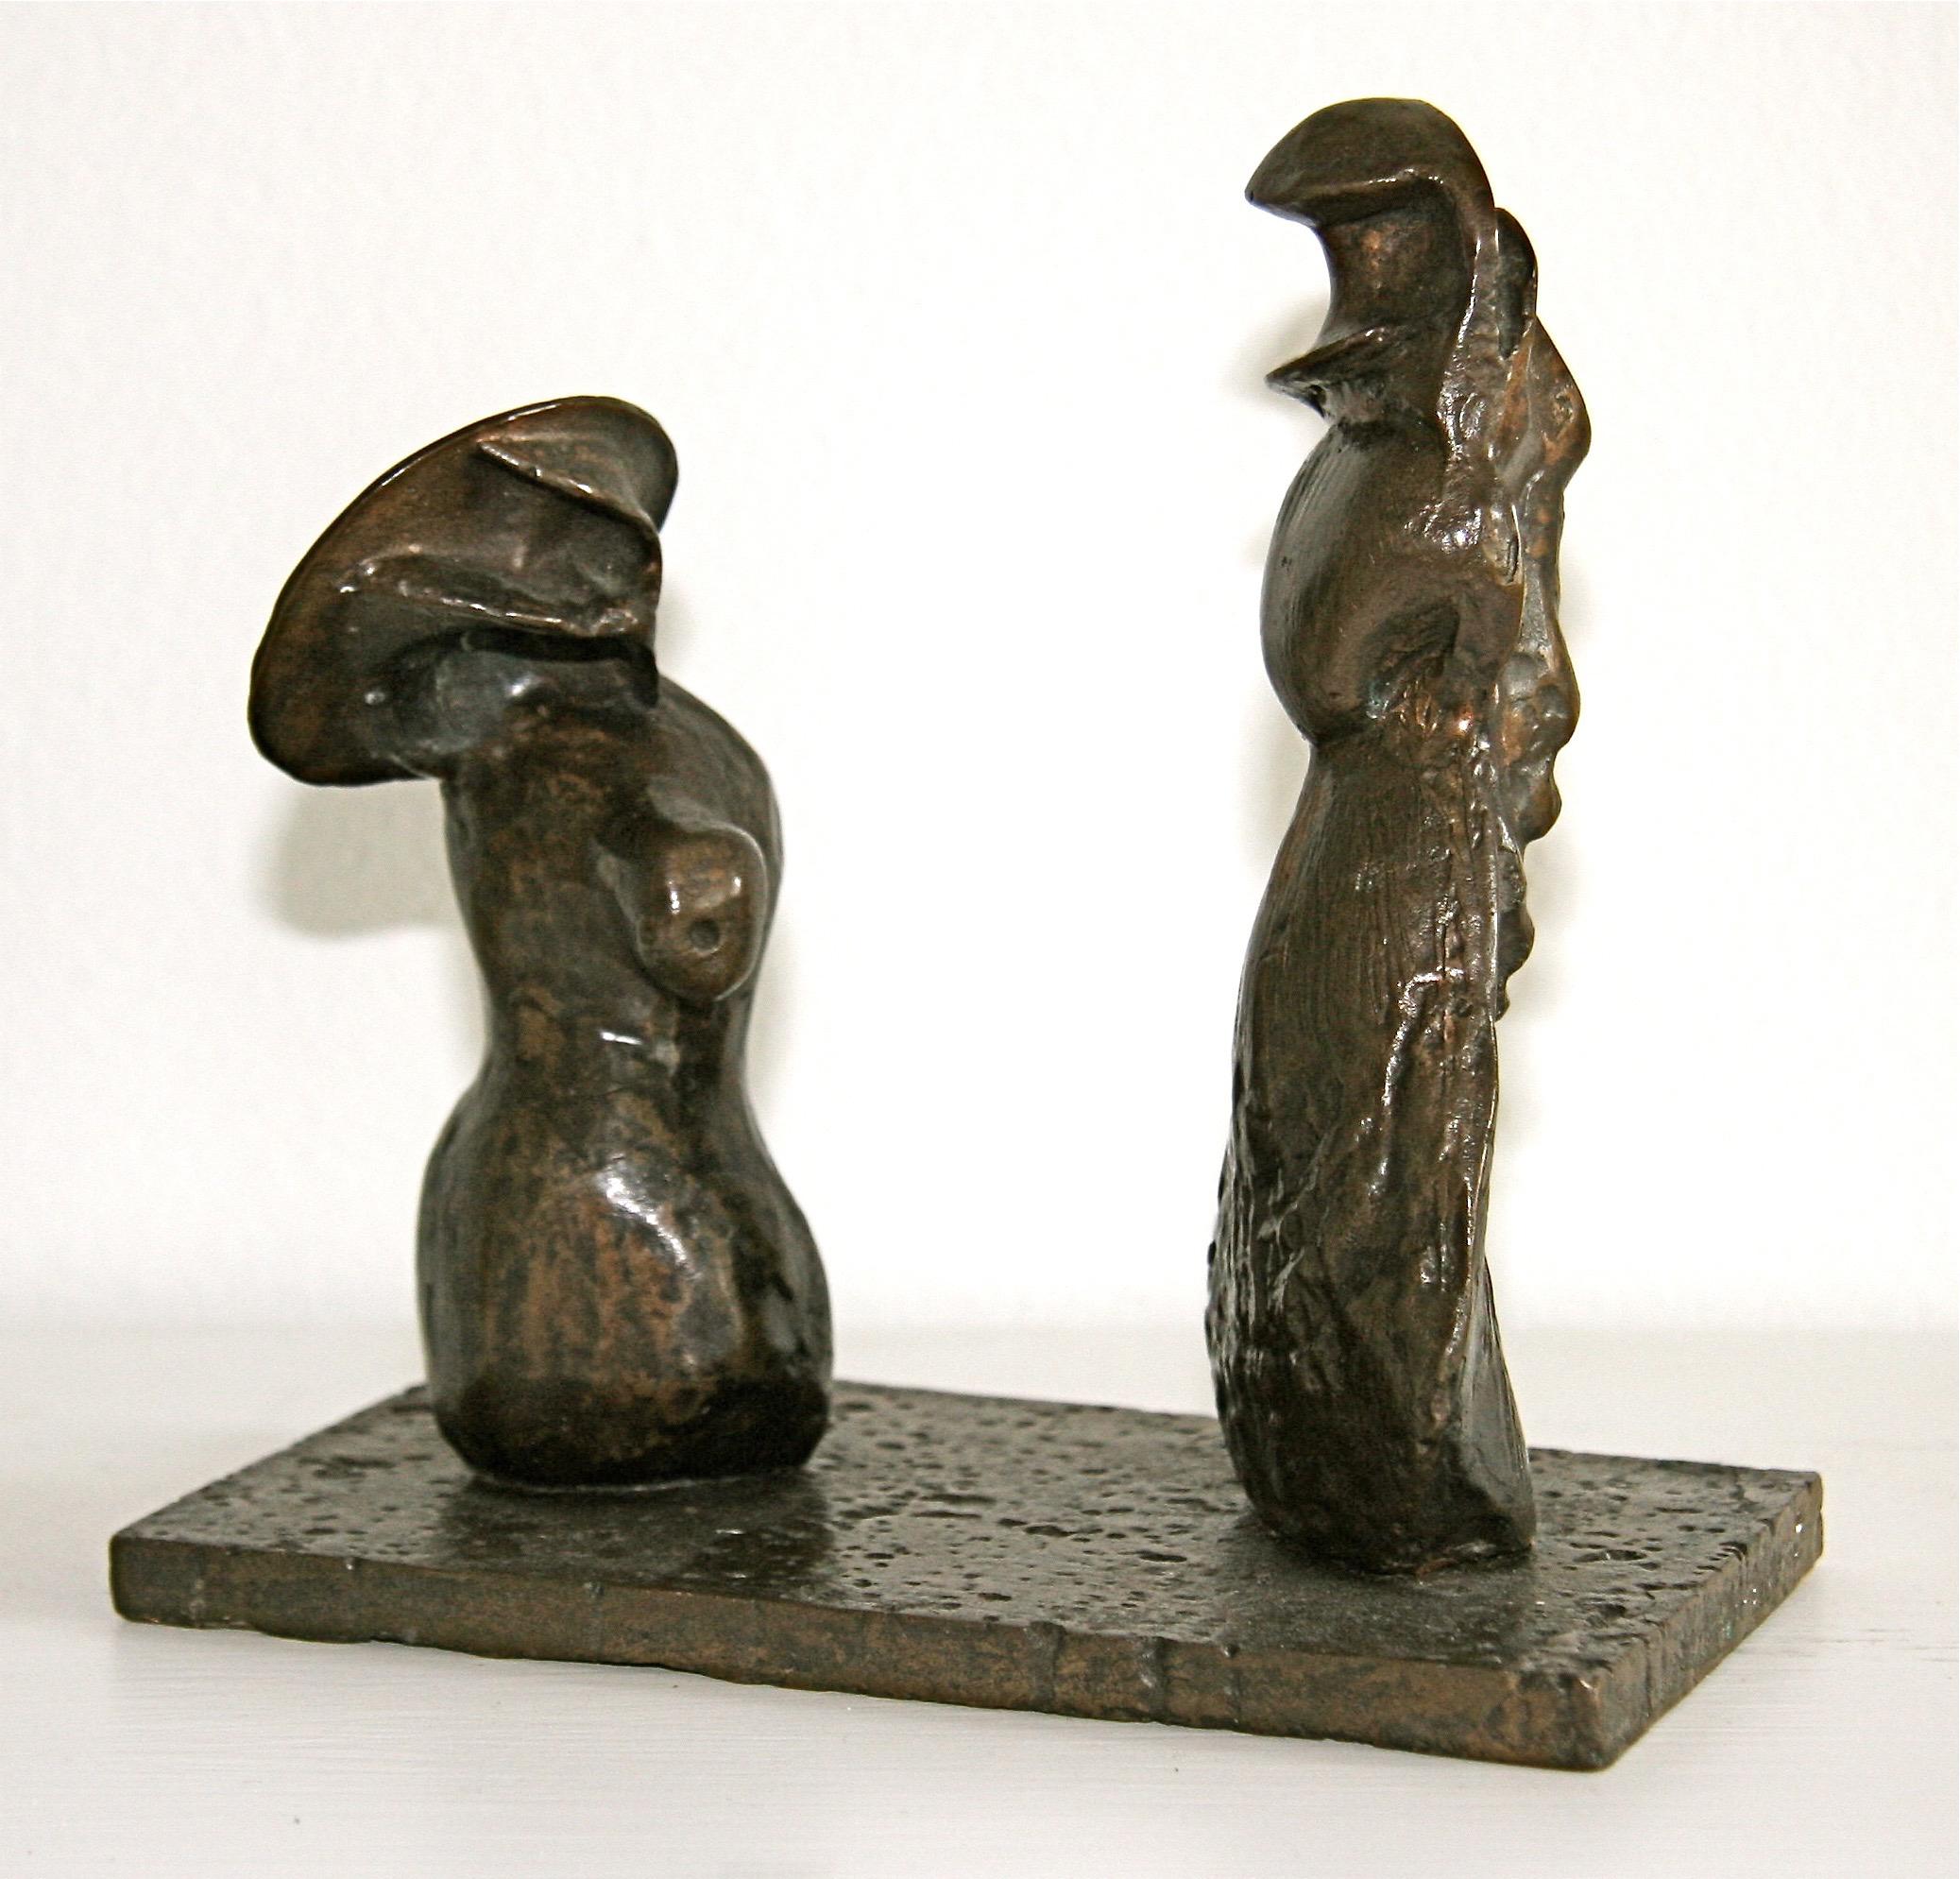 Henry Moore Figurative Sculpture - GIRL AND DWARF